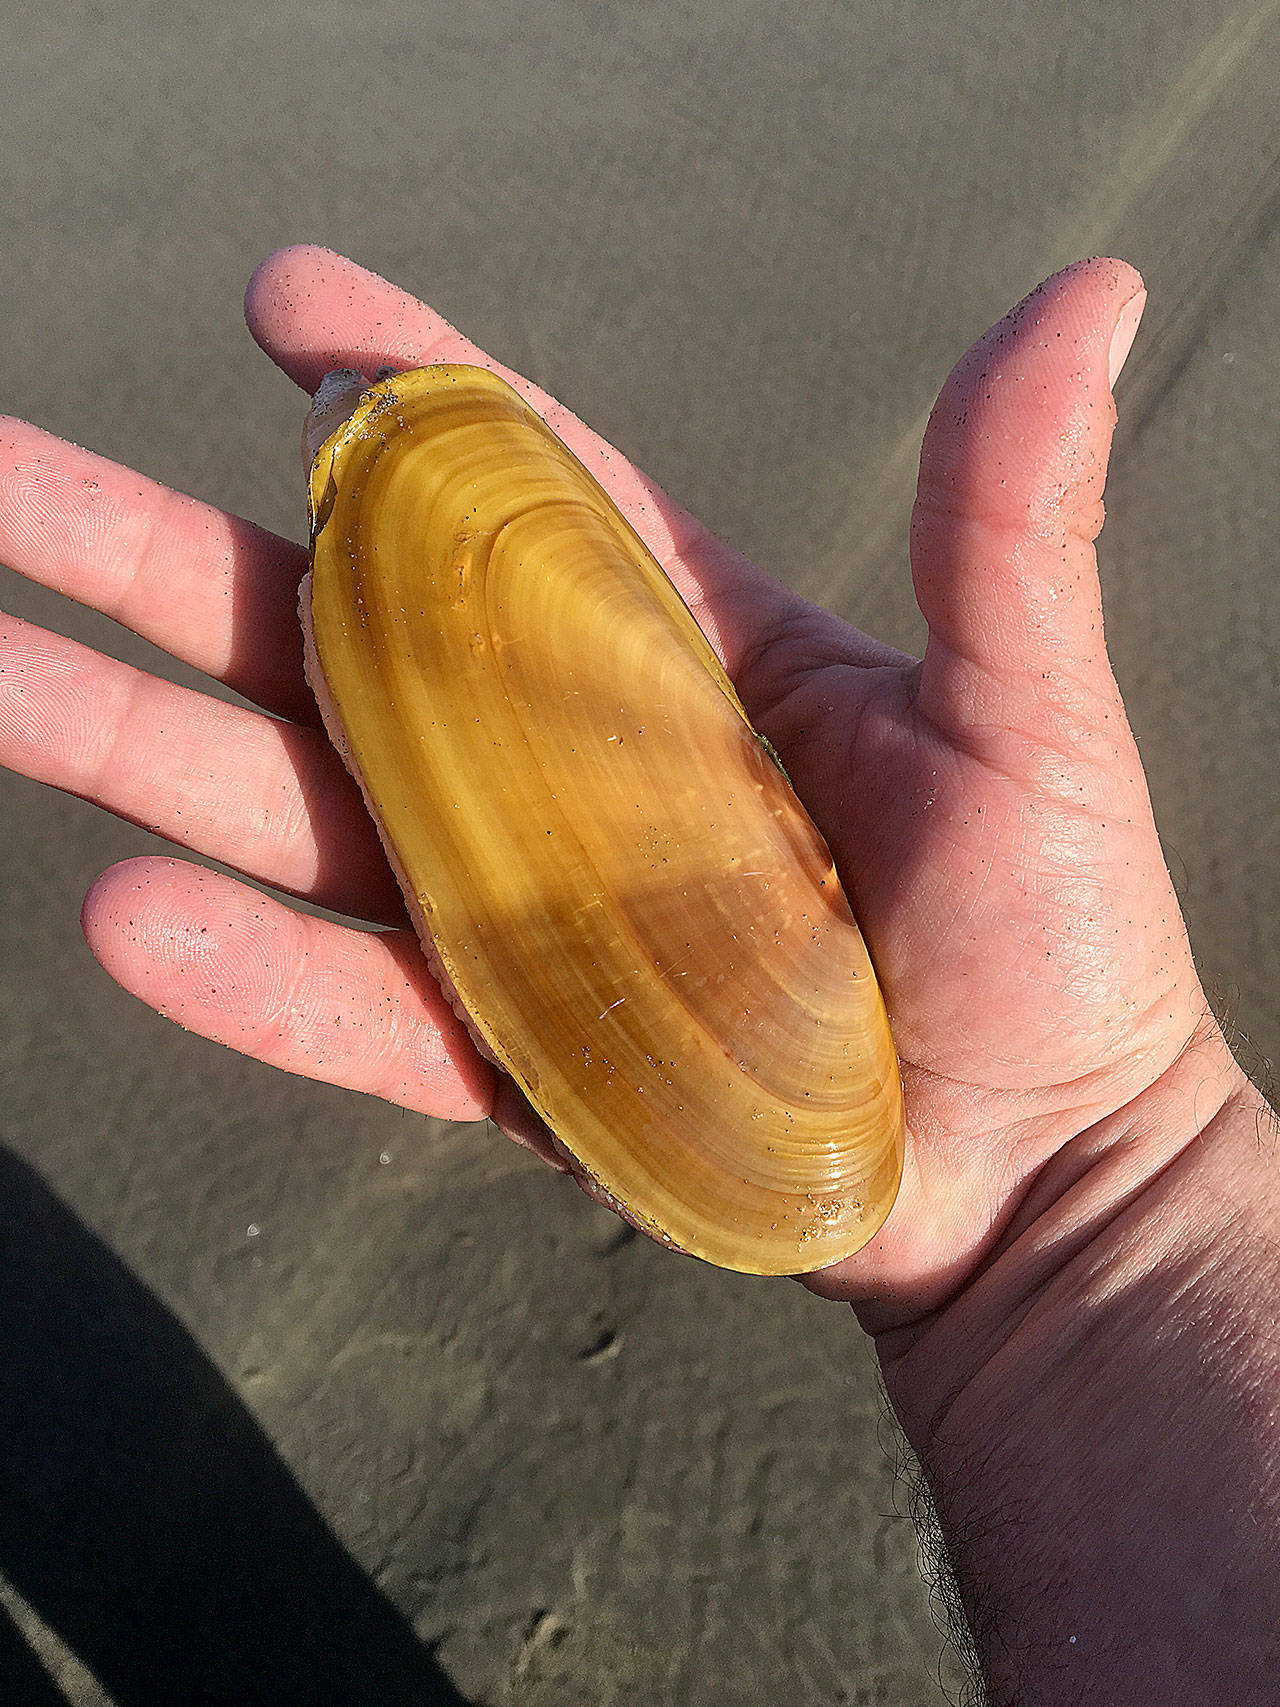 DAN HAMMOCK | GRAYS HARBOR NEWS GROUP                                Seven days of digging for razor clams beginning Oct. 26 at Copalis and Mocrocks beaches have been approved. Tentative digs scheduled for Twin Harbors and Long Beach are on hold pending another round of marine toxin tests.